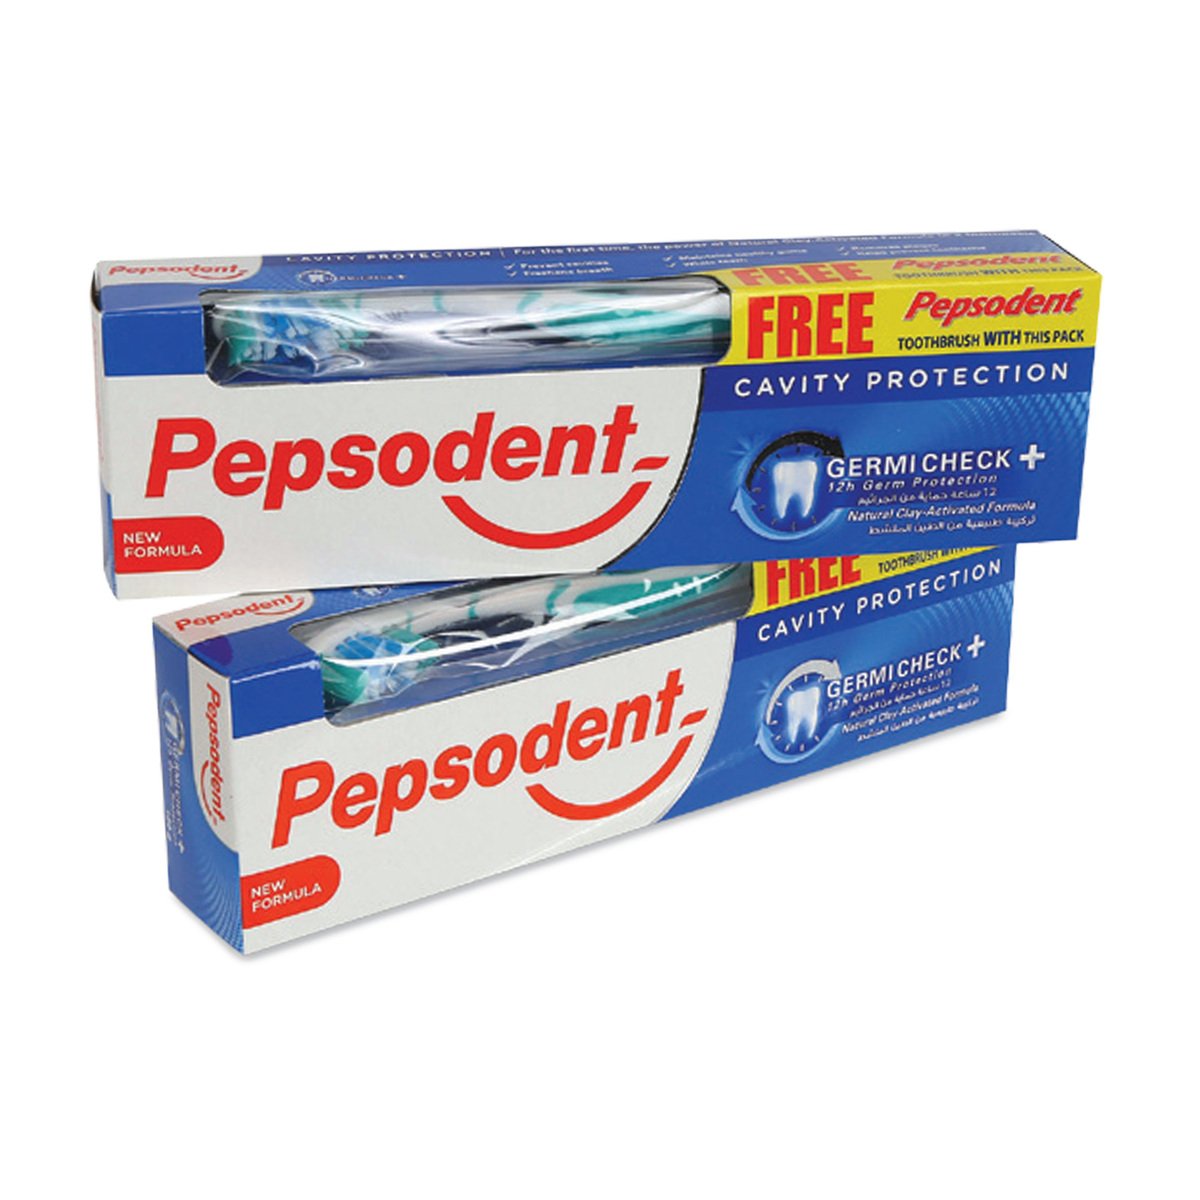 Pepsodent Toothpaste Germ Check 150 g + Toothbrush 2 pkt